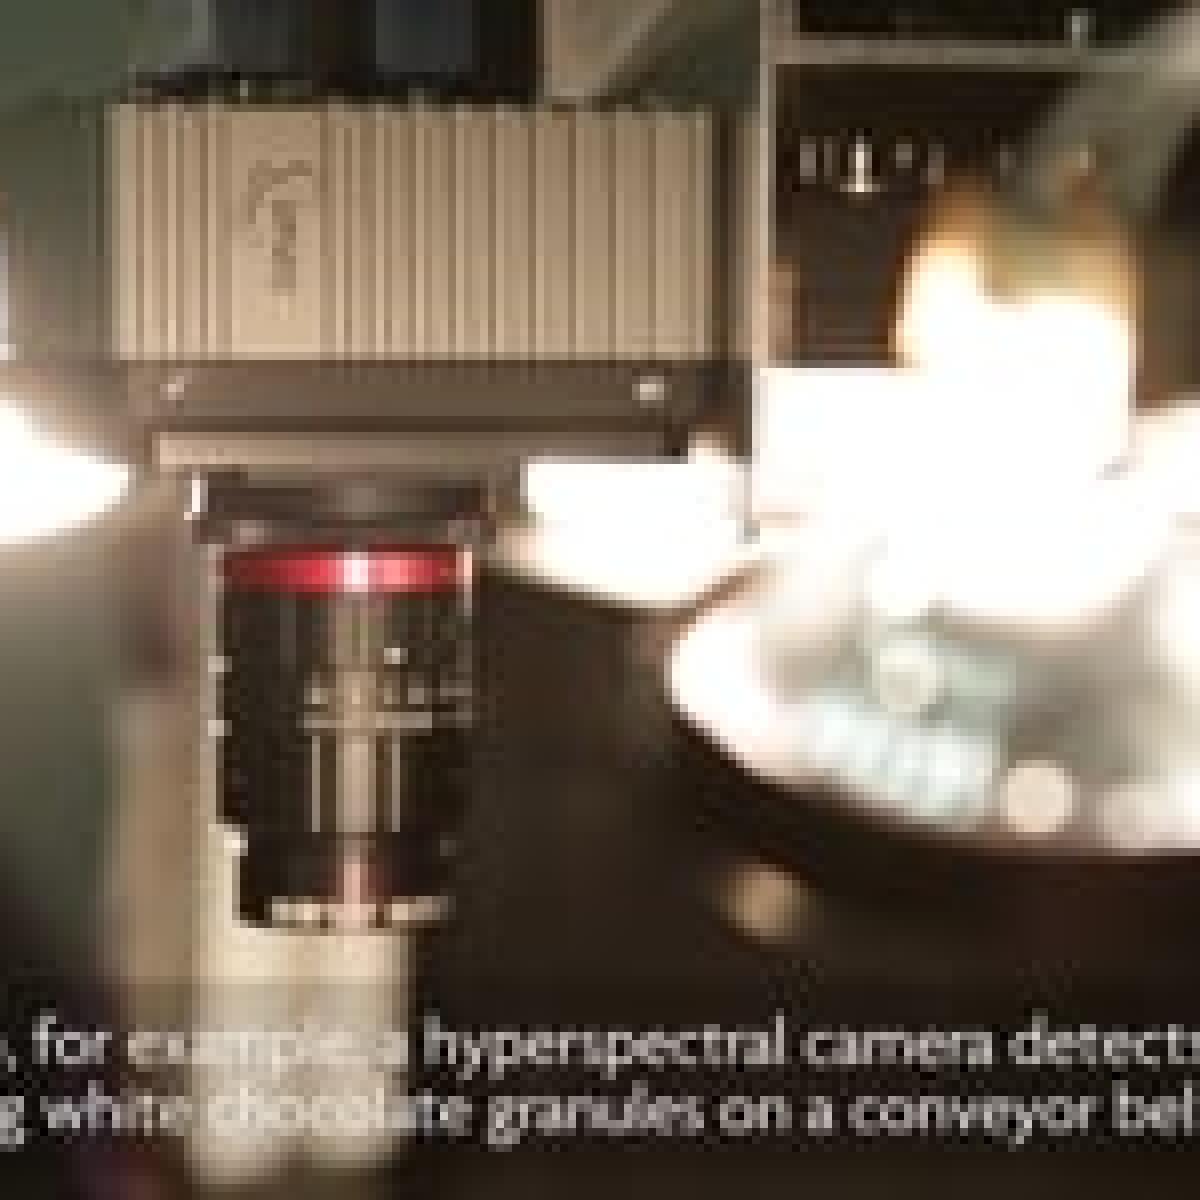 A close up of a hyperspectral camera put in a bright environment